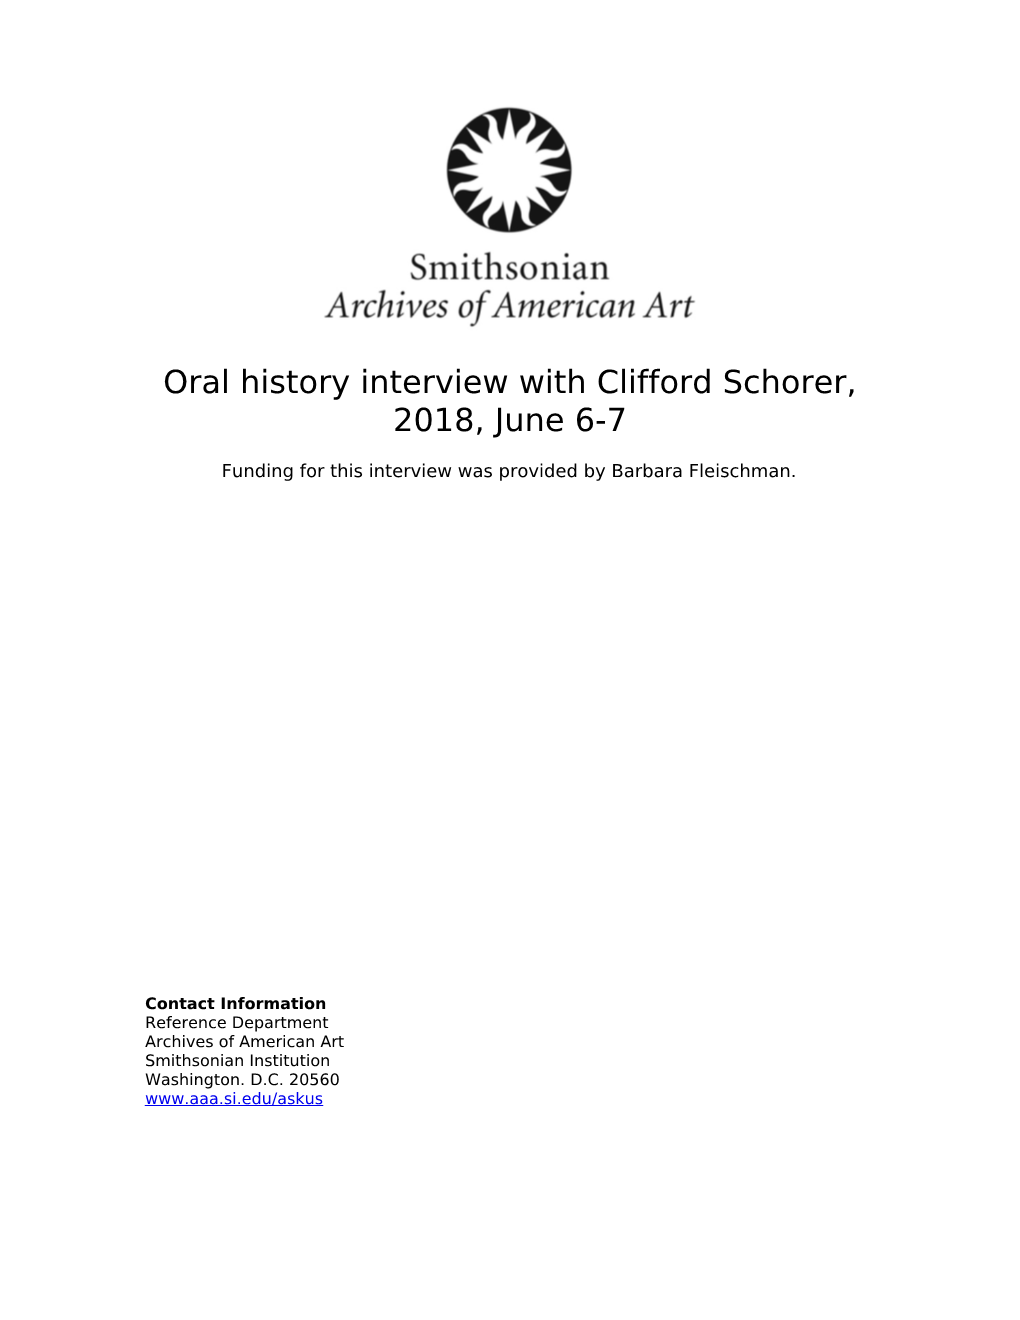 Oral History Interview with Clifford Schorer, 2018, June 6-7